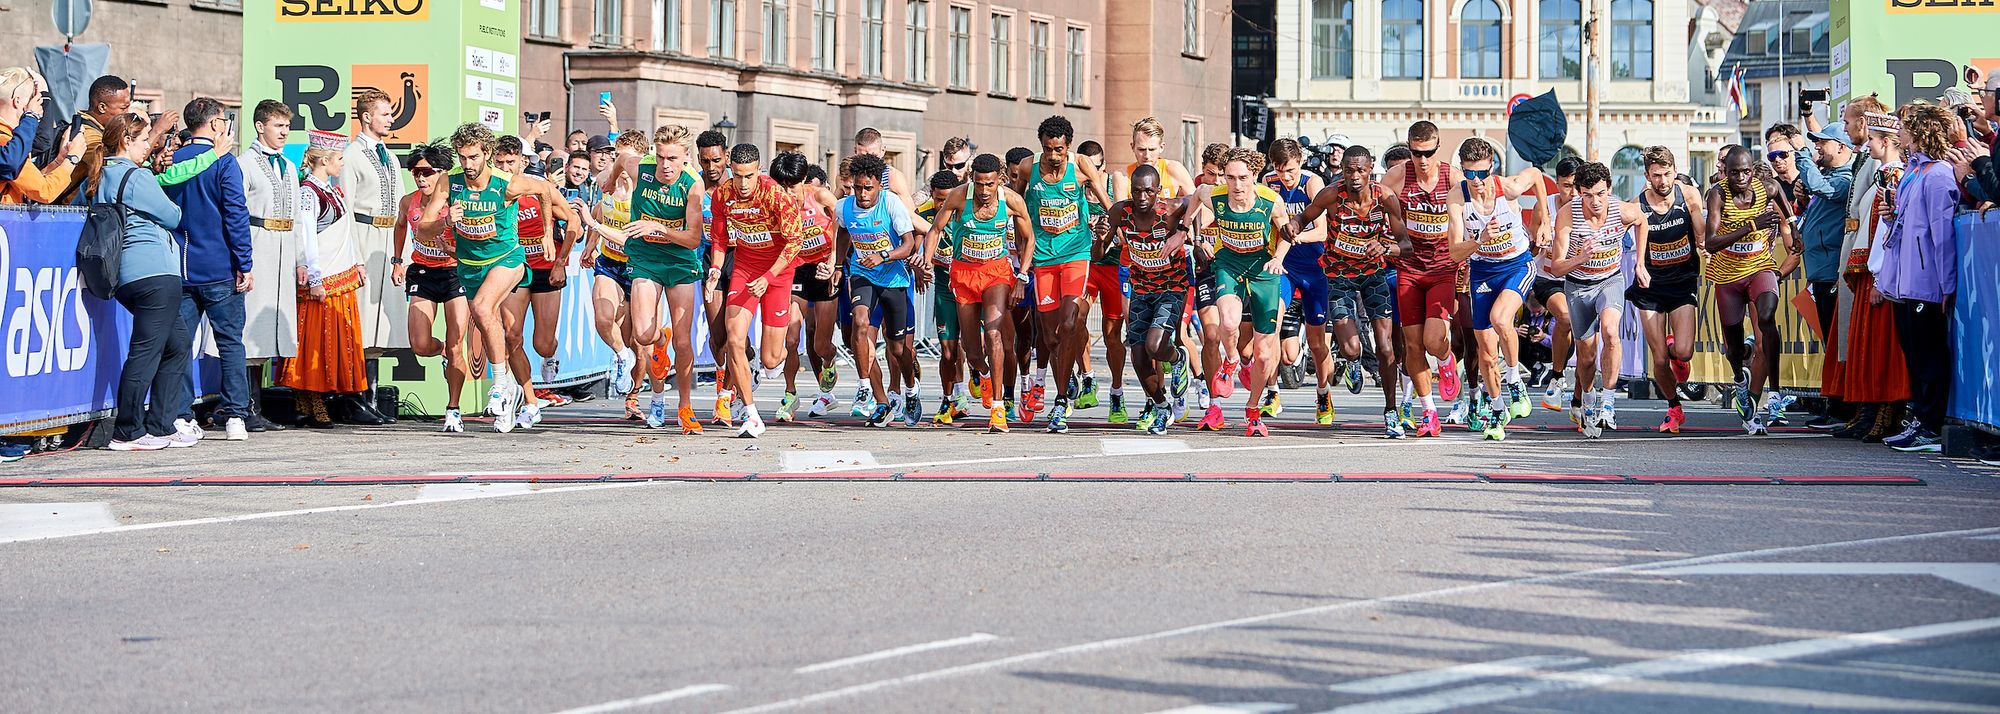 Watch a replay of the road mile and 5km as world records are broken at the World Athletics Road Running Championships